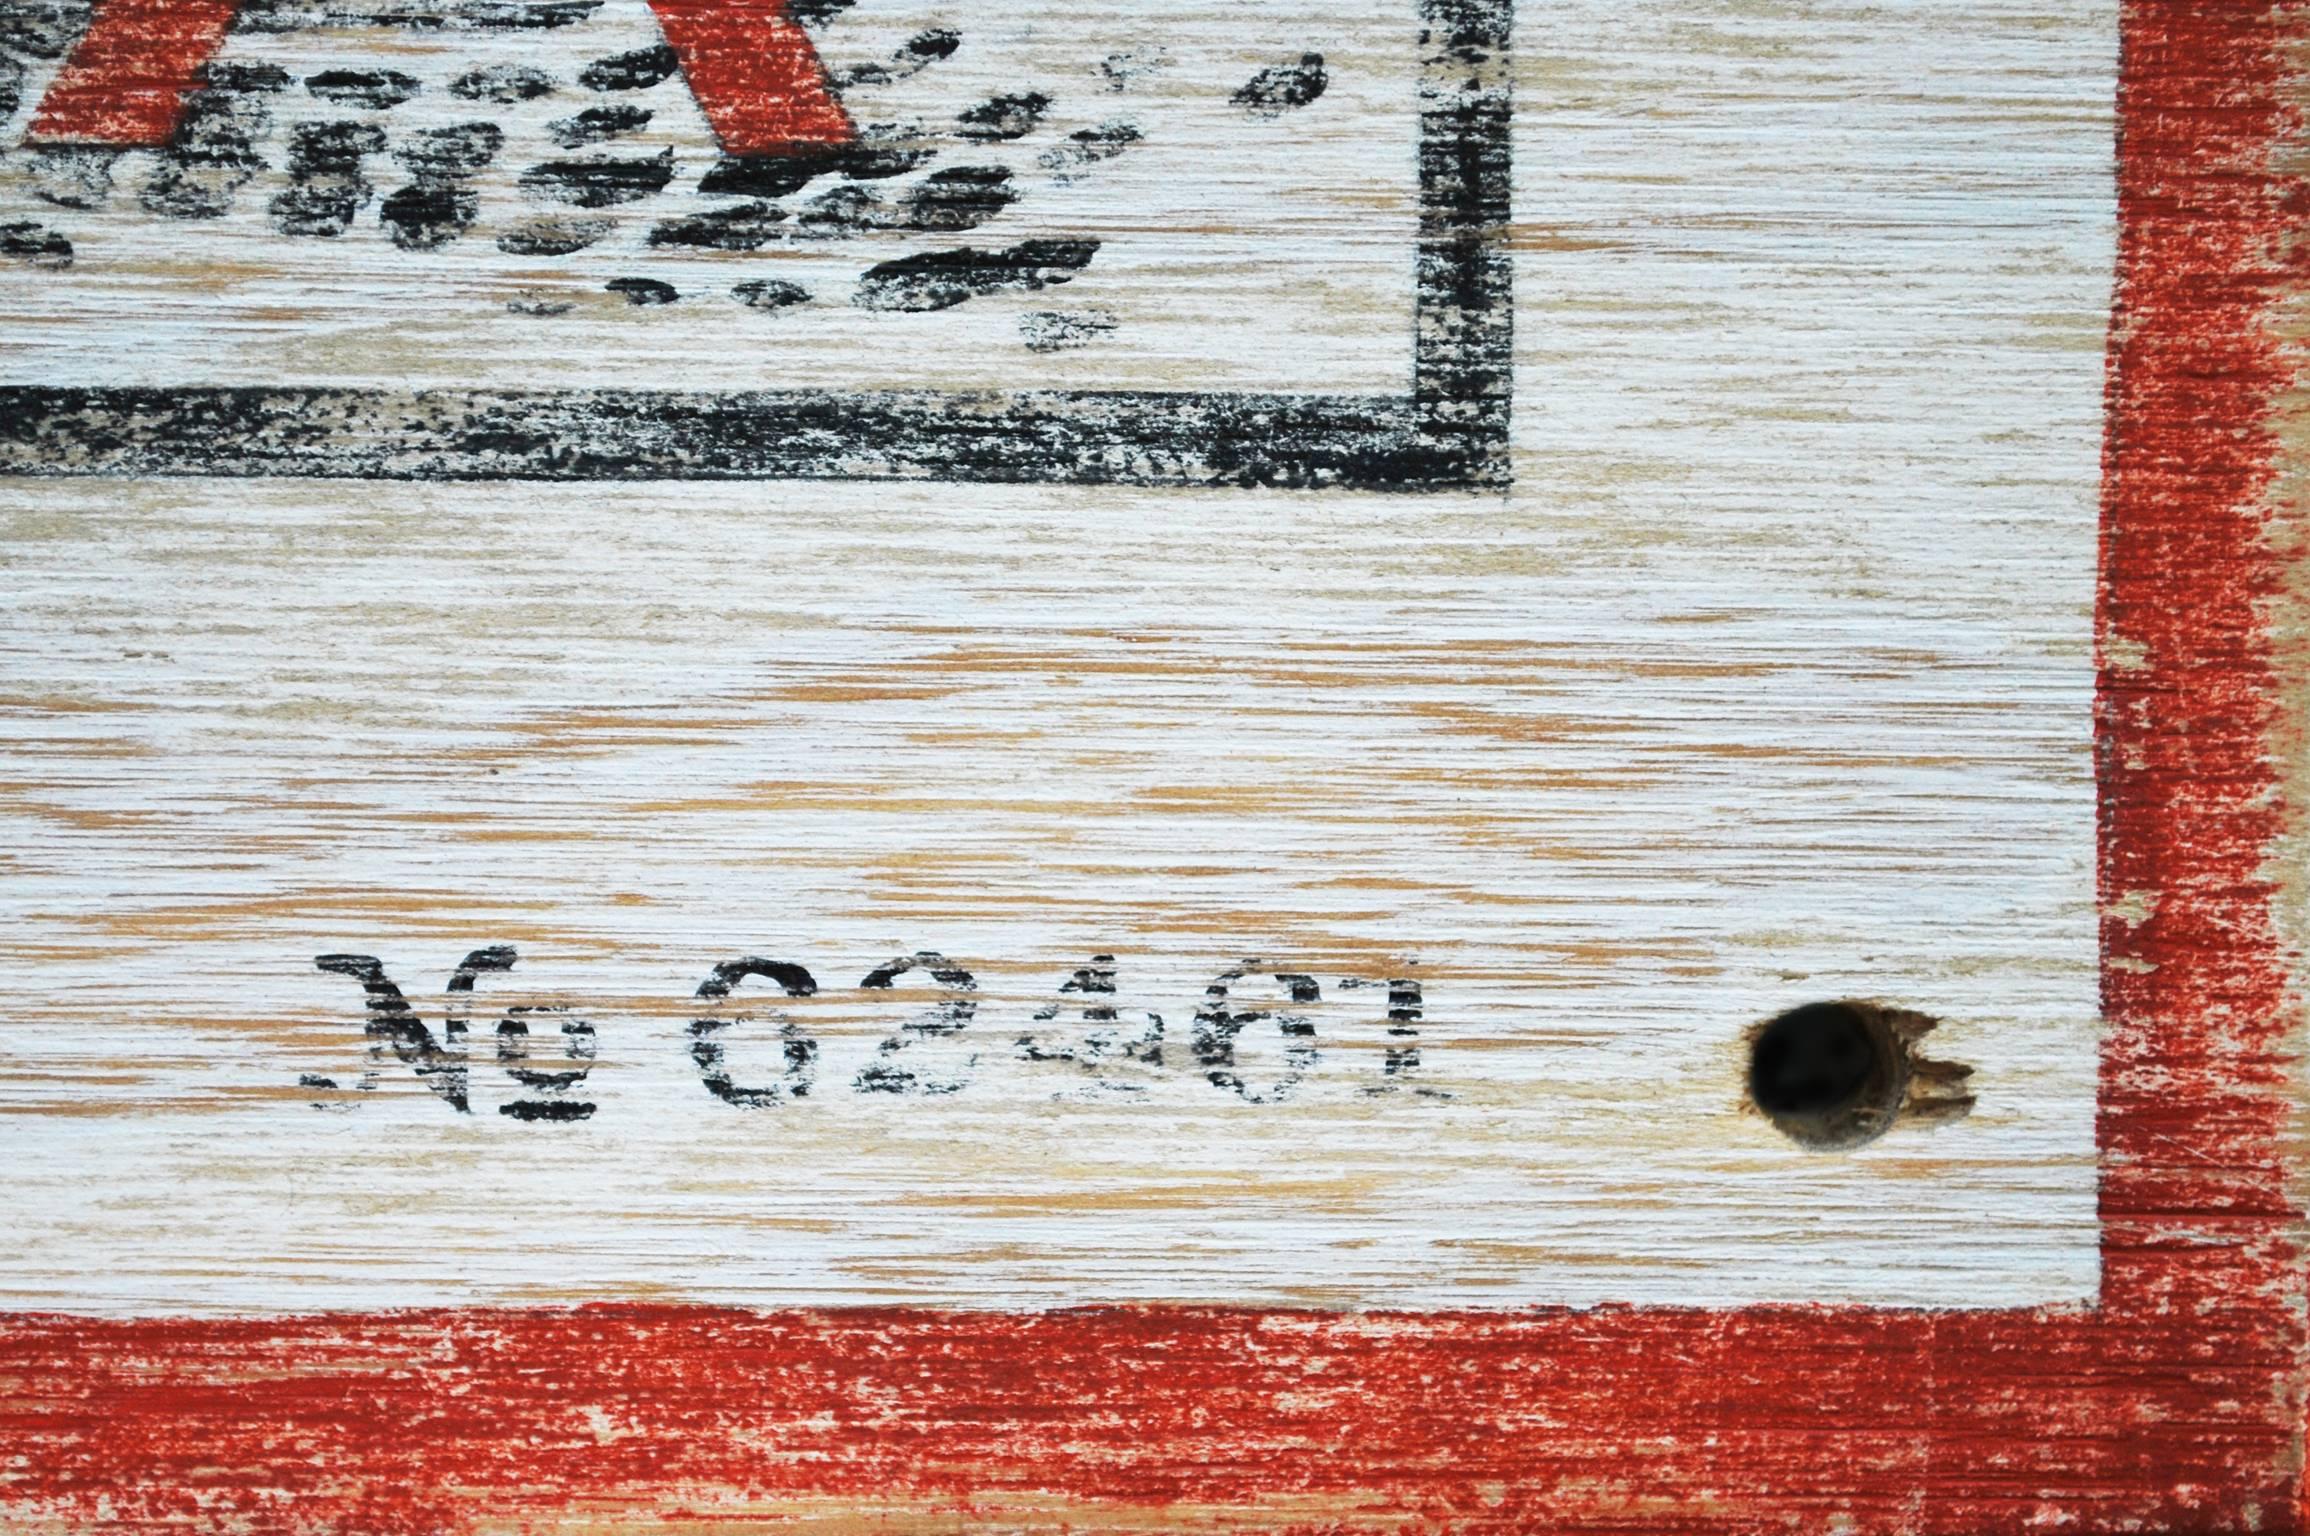 "Beyond This Point" from Steve Carver's "Is It Safe?" series is a black and white text based piece with a red arrow pointing down at an eye. The eye has a red 'X' over it. Another piece from the series, titled "Trauma